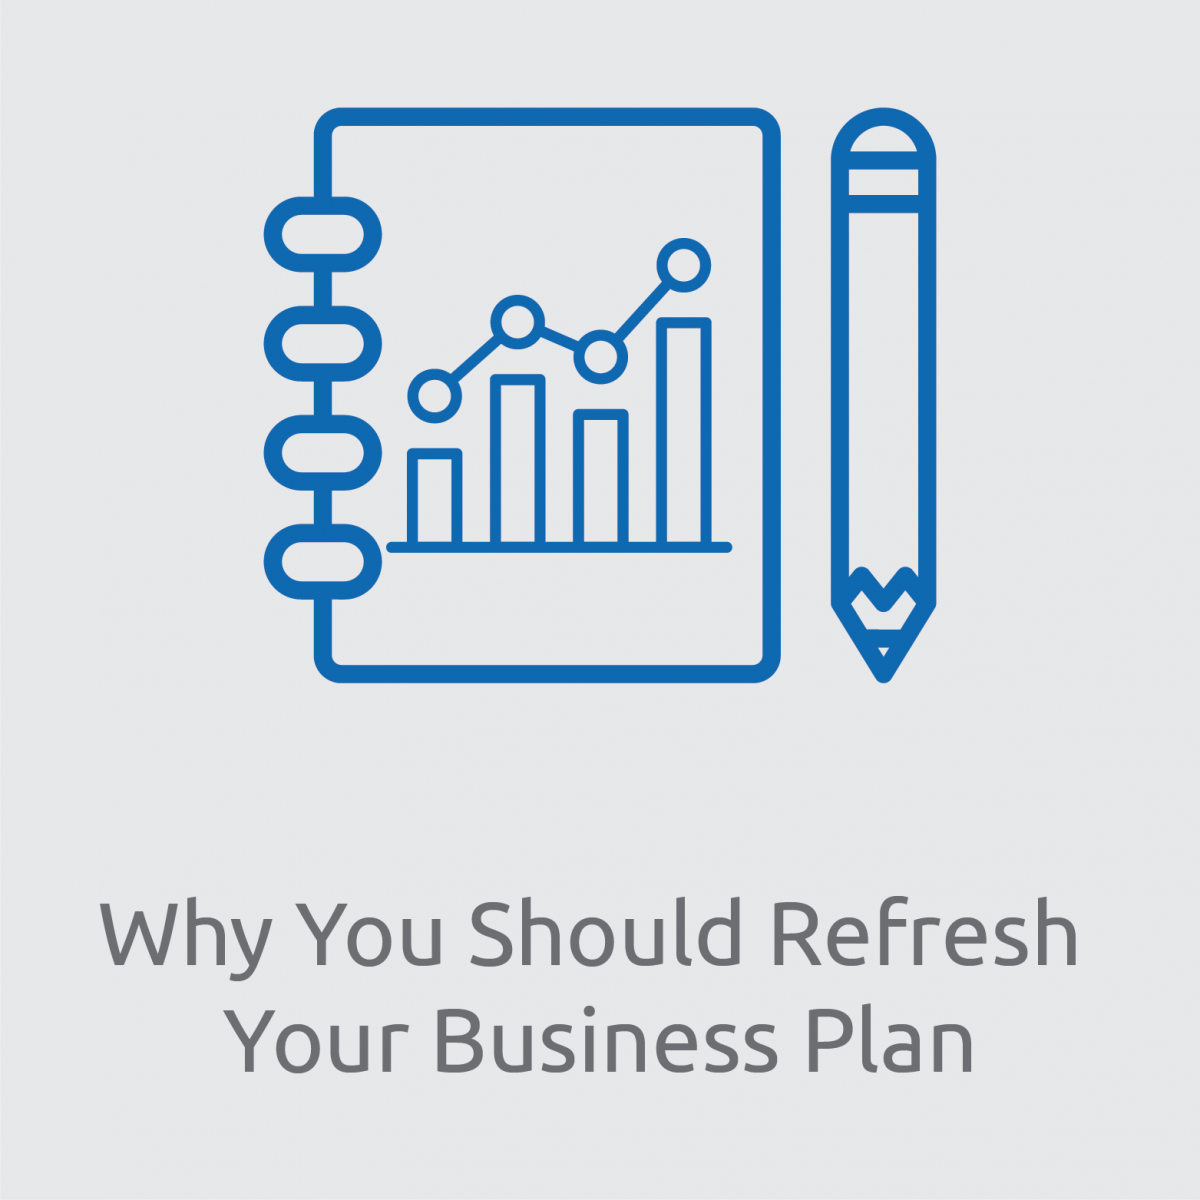 Why You Should Refresh Business Plan